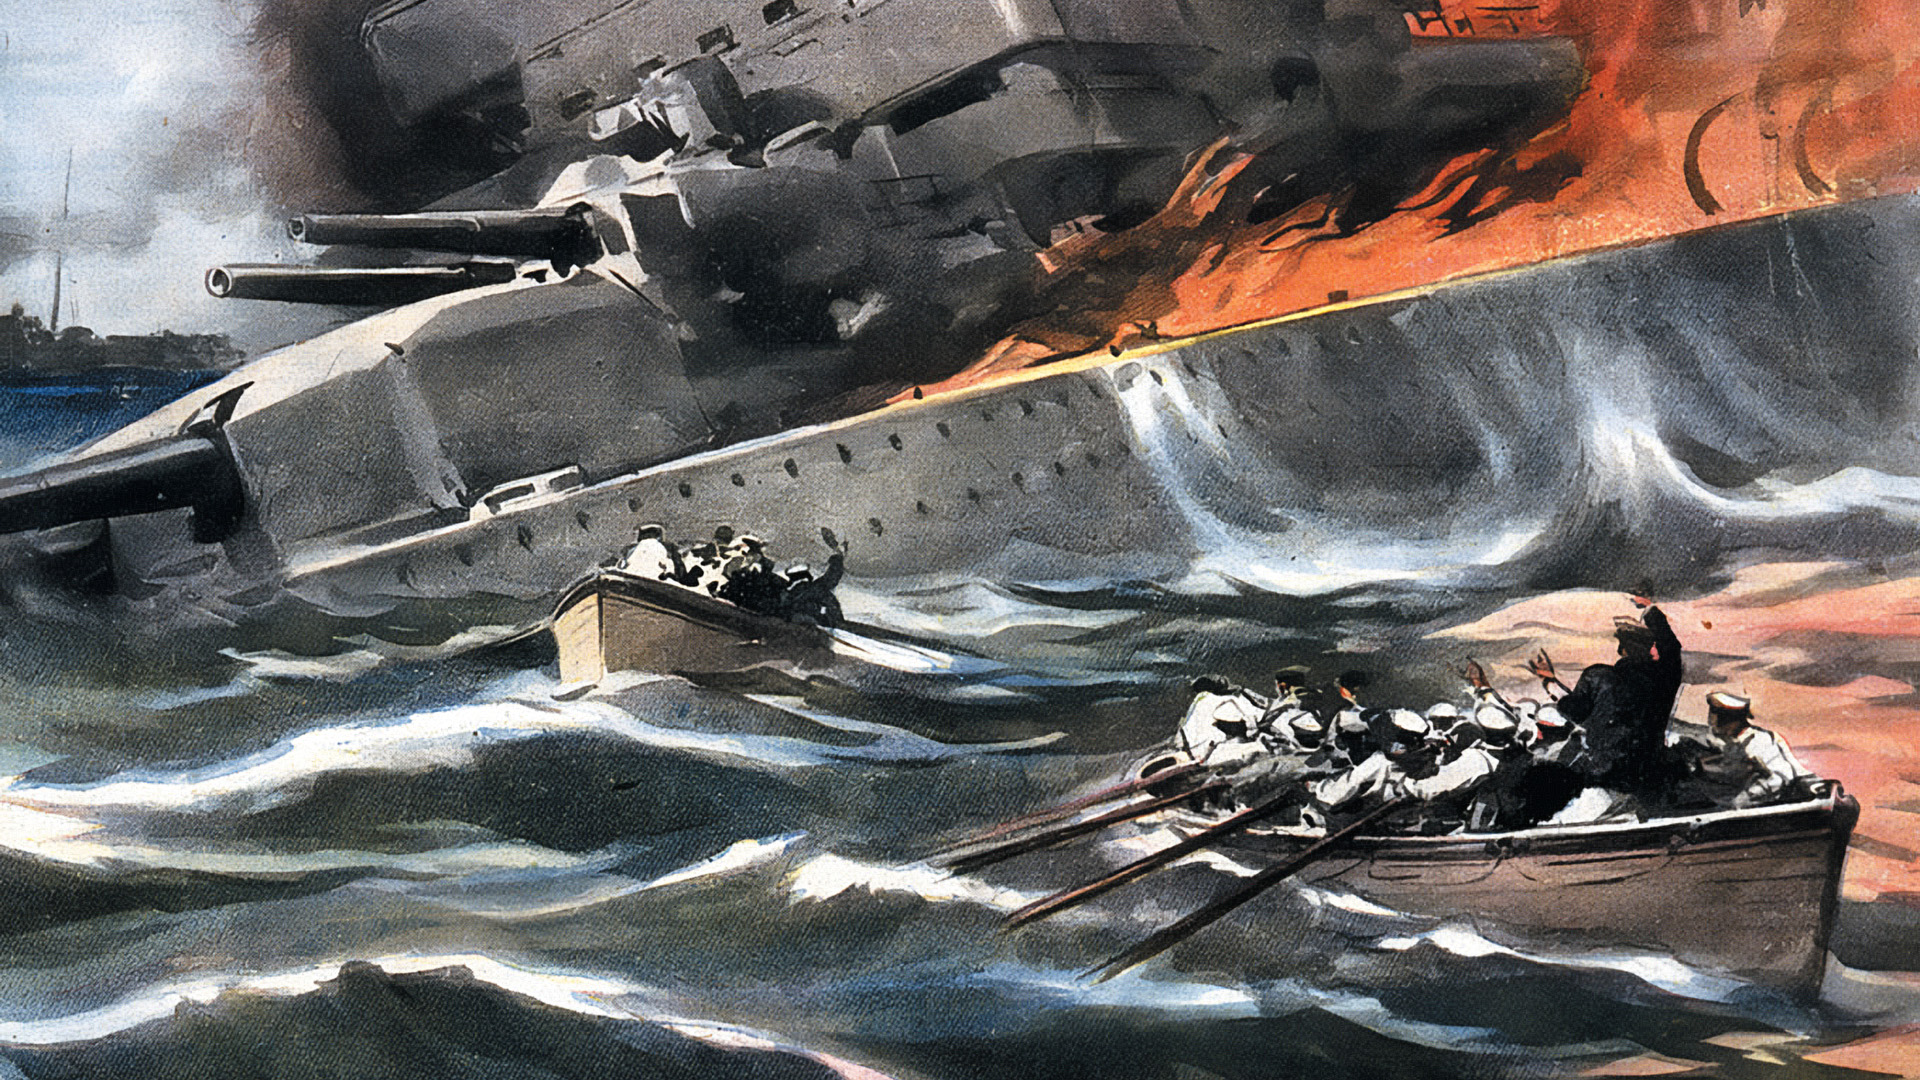 On December 17, 1939, just four days after the Battle of the River Plate, the crew of the Admiral Graf Spee set off explosives they had planted aboard the ship scuttling it in the mouth of the river.